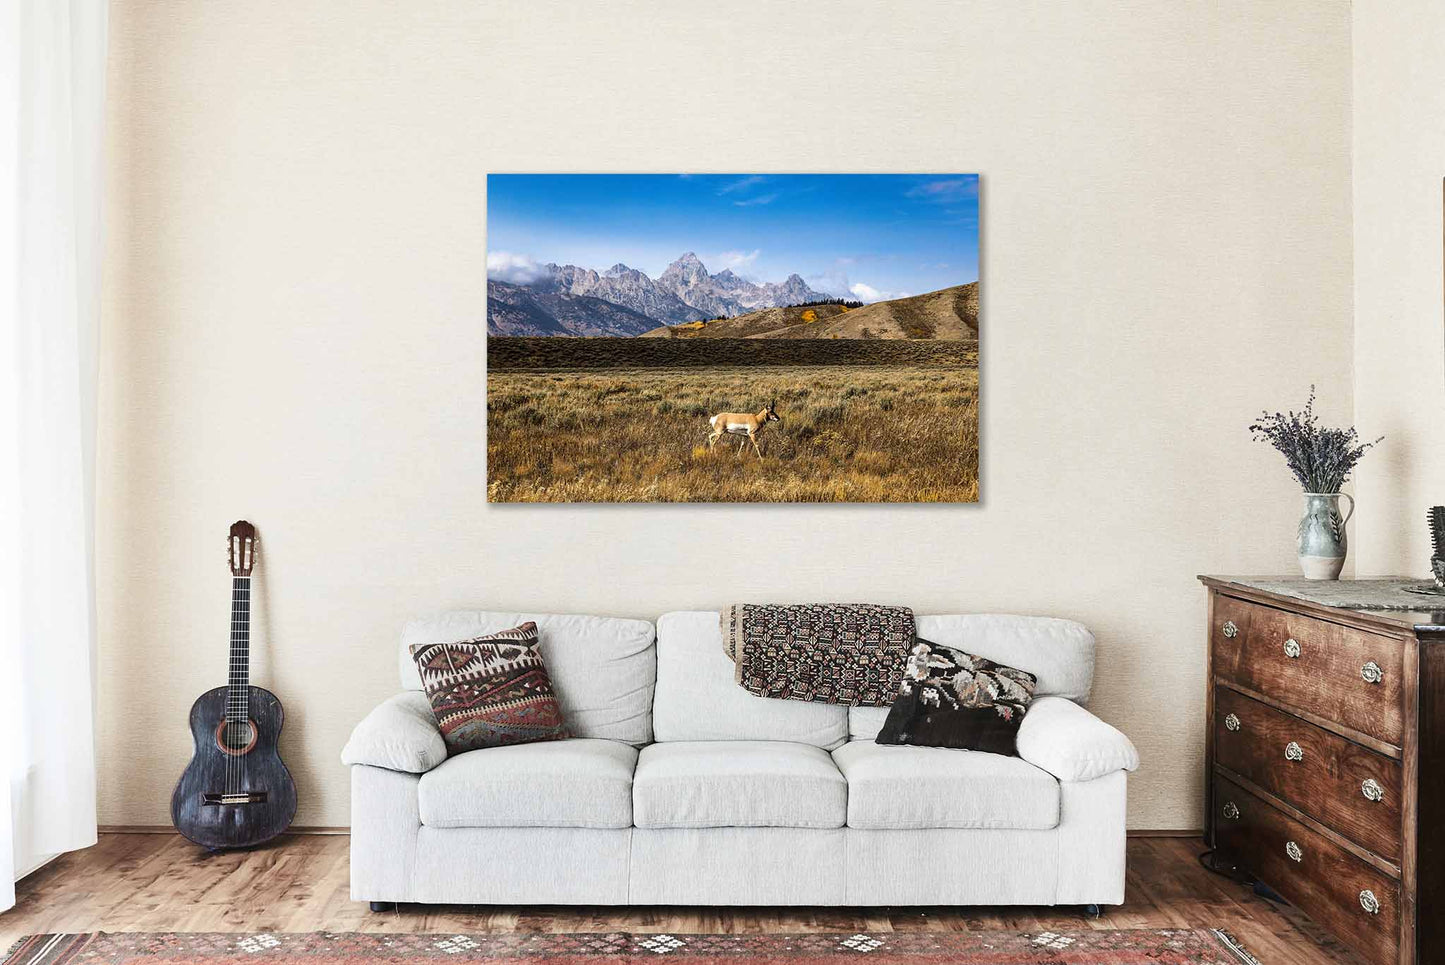 Wildlife Metal Print (Ready to Hang) Photo of Pronghorn Antelope and Grand Teton in Wyoming Rocky Mountain Wall Art Western Decor